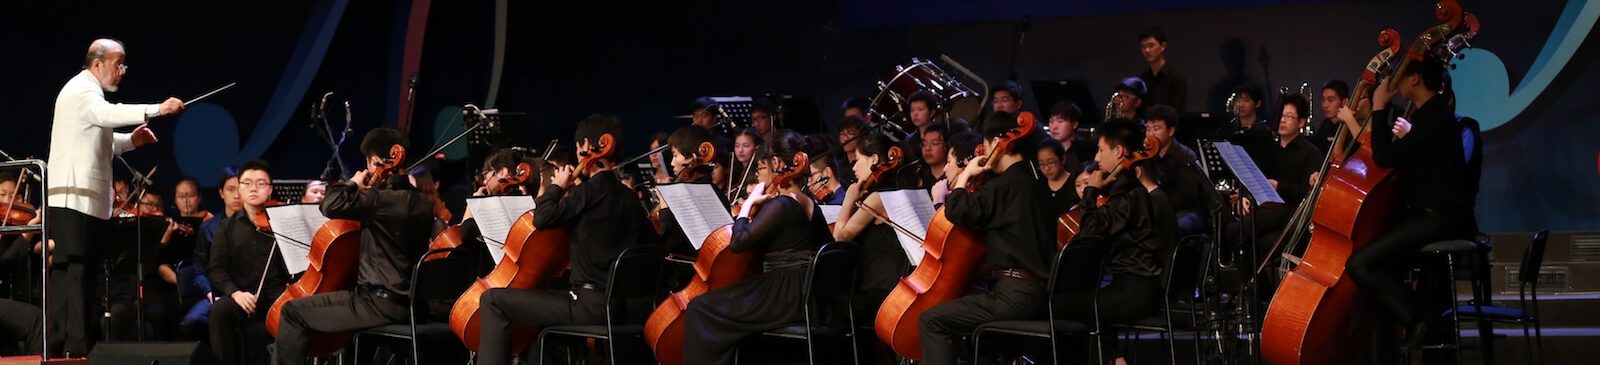 International Festival & Competition of Orchestras